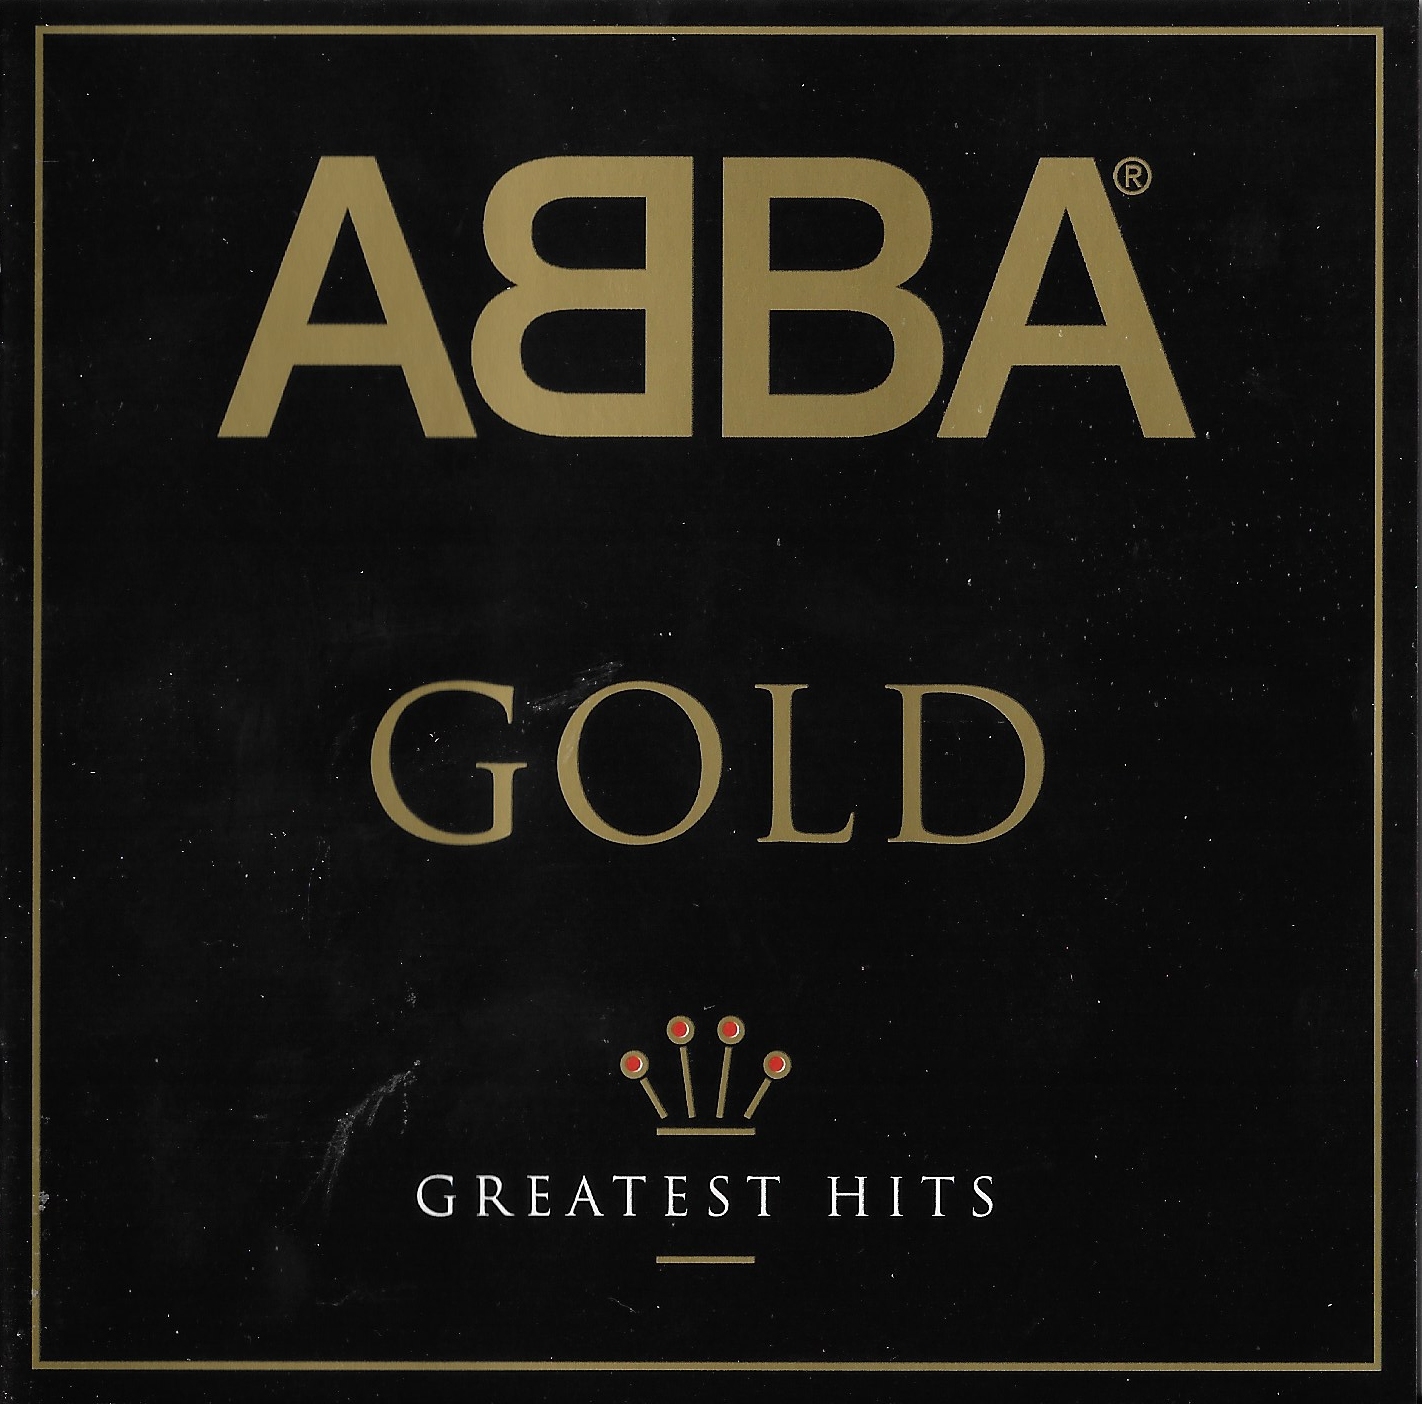 Picture of Abba gold - Greatest hits by artist Abba  